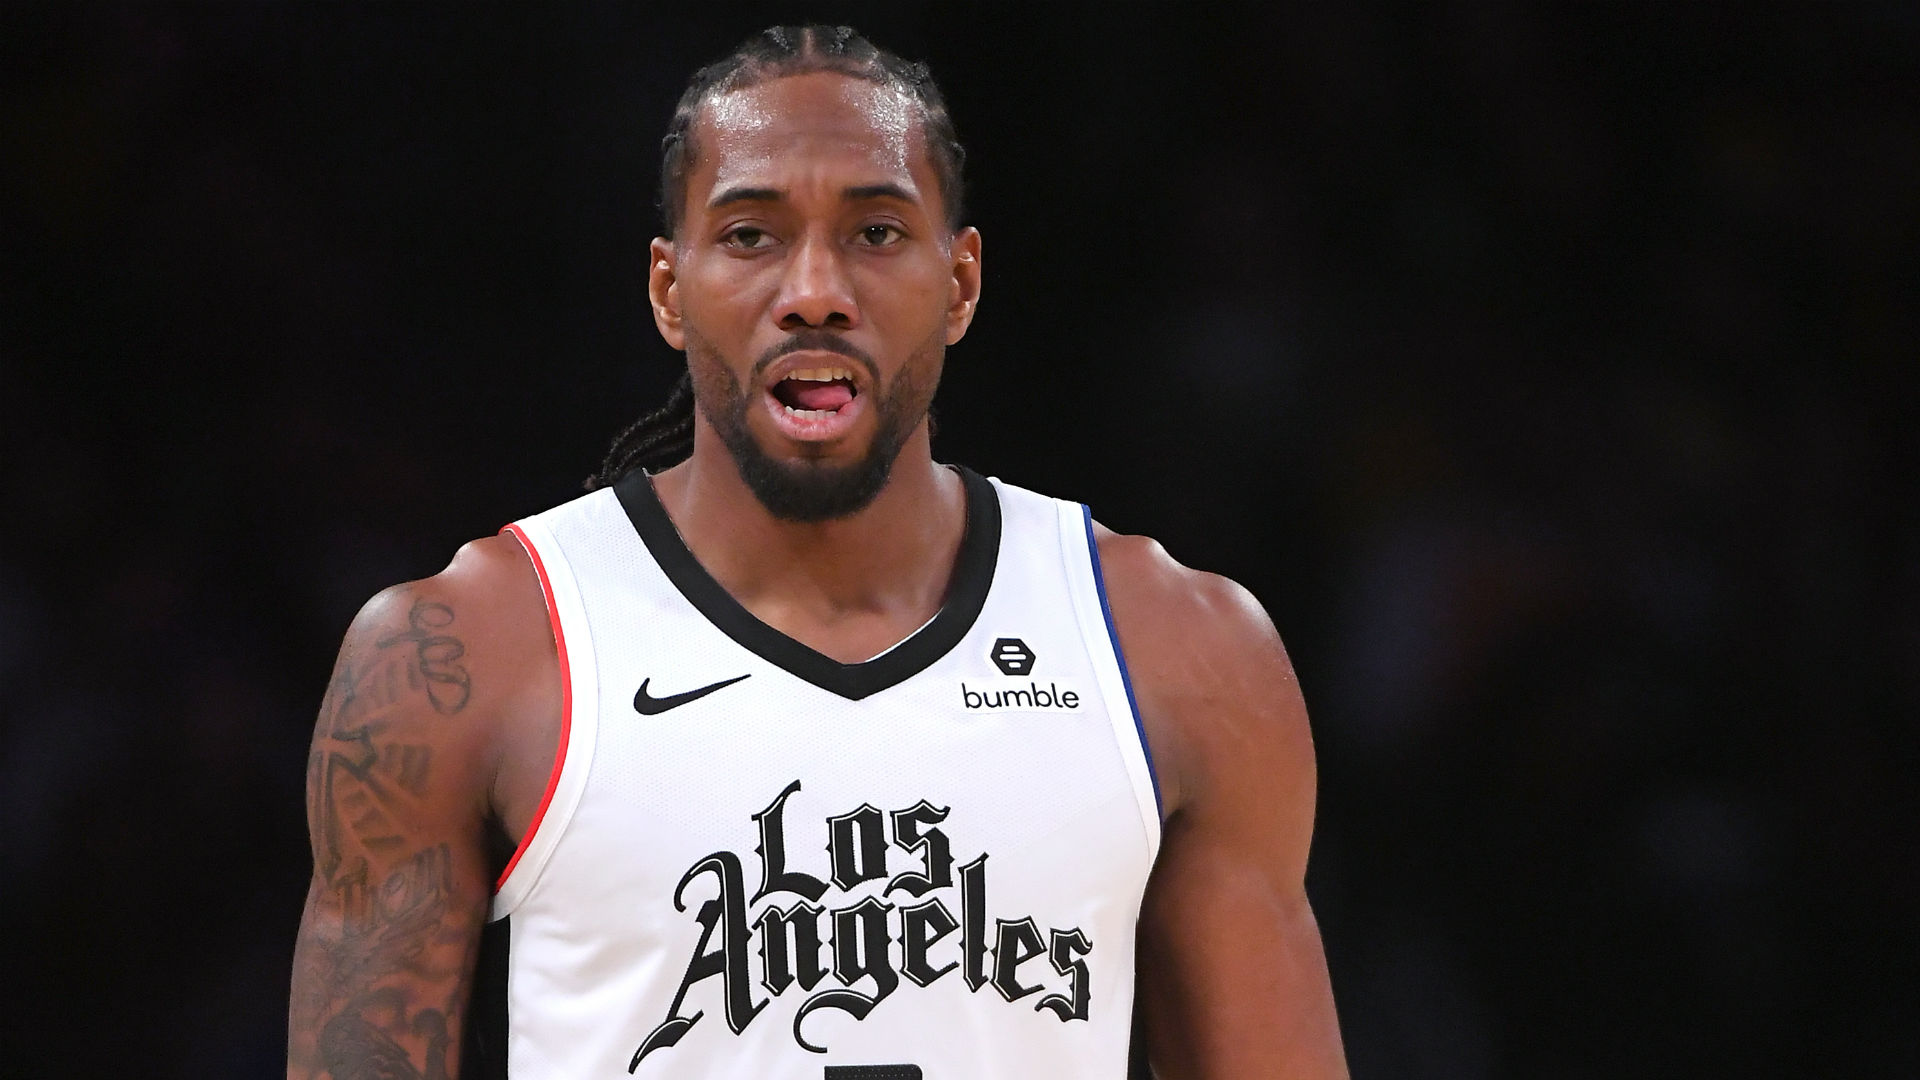 Although Luka Doncic scored 36 points, Kawhi Leonard and the Los Angeles Clippers still secured a 110-107 victory over the Dallas Mavericks.